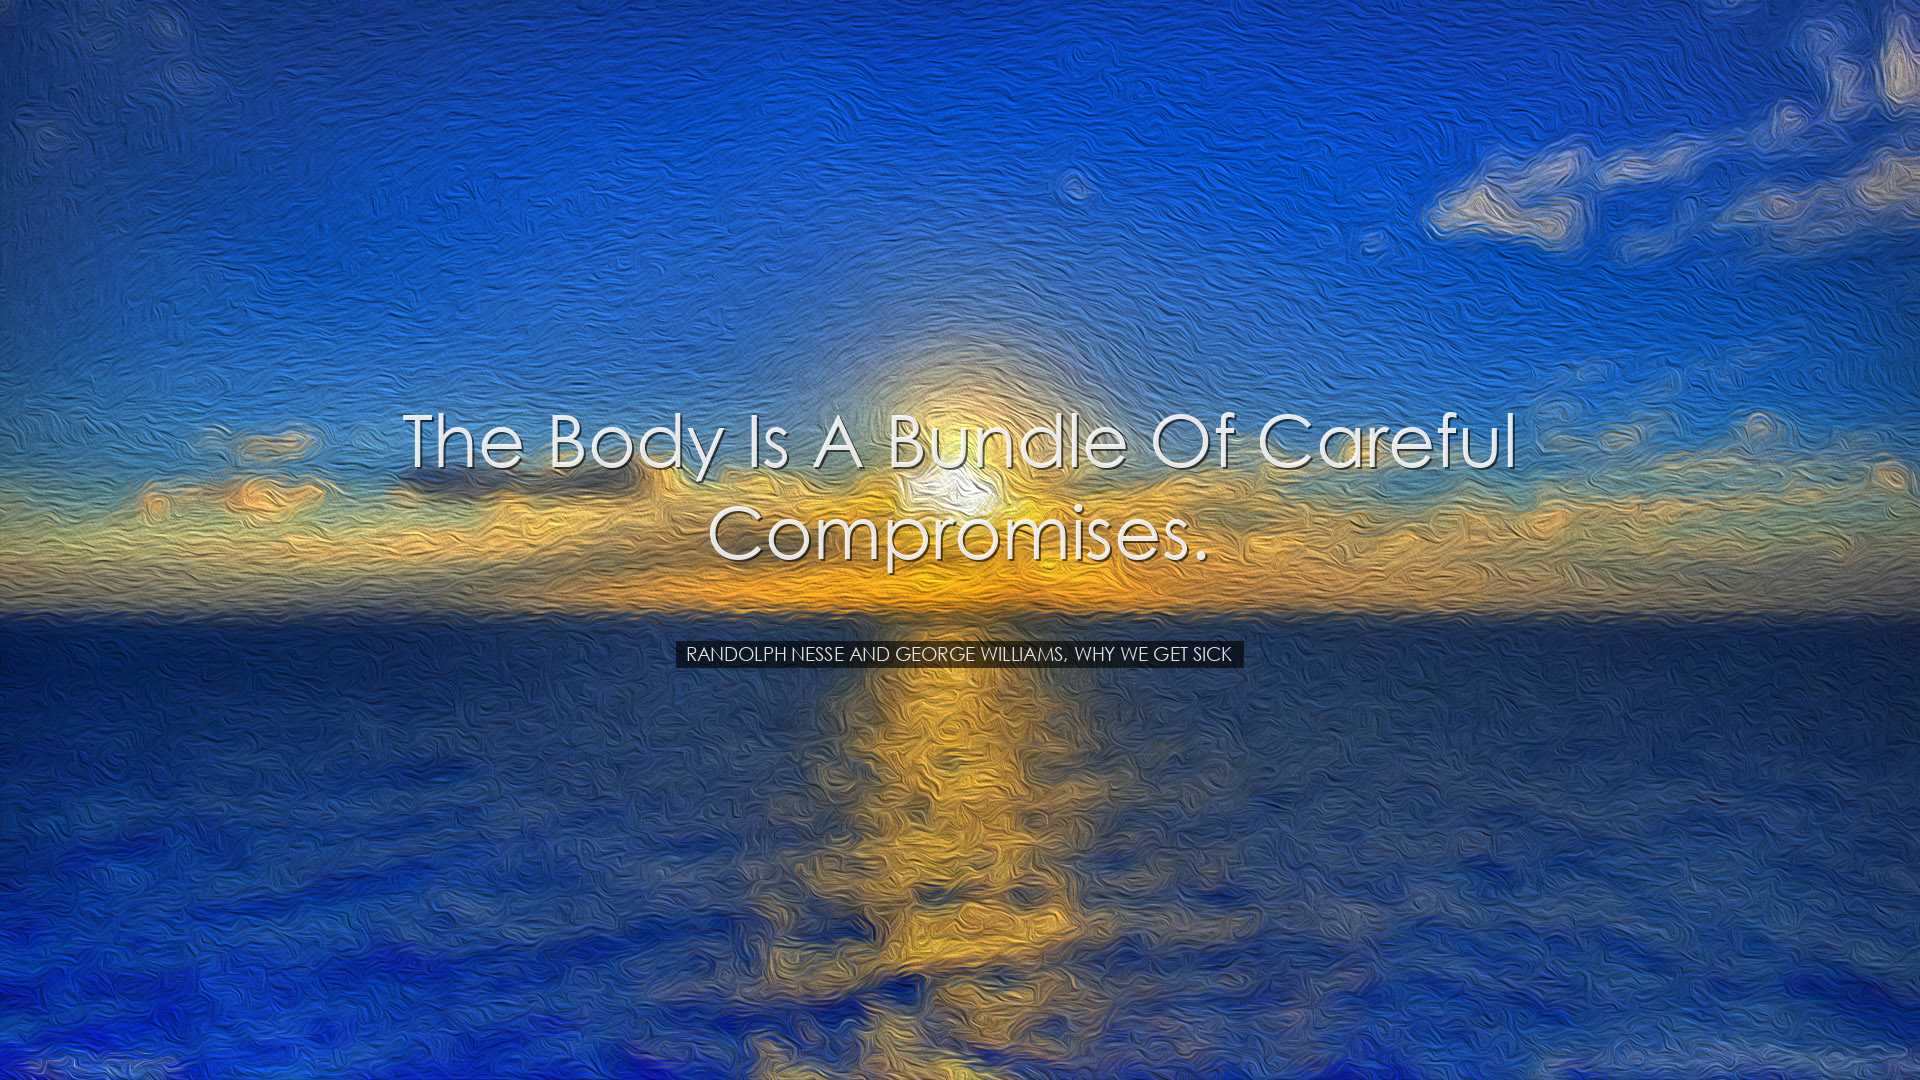 The body is a bundle of careful compromises. - Randolph Nesse and